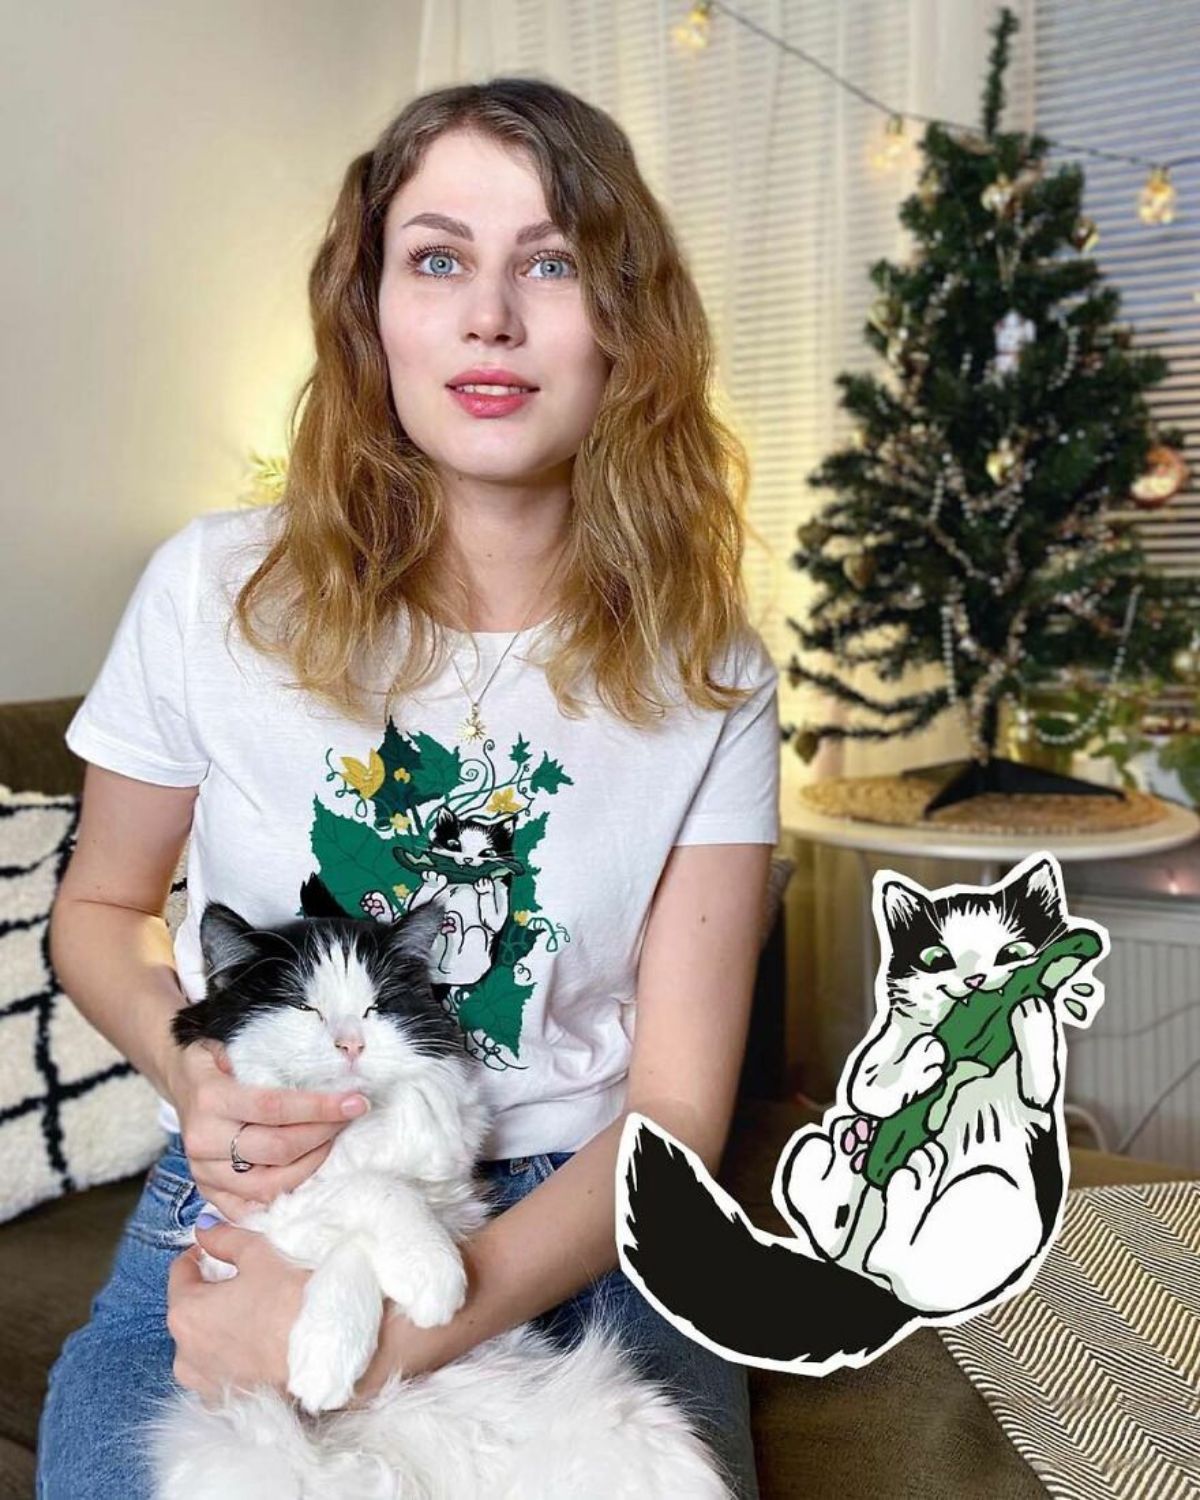 black and white fluffy cat on a woman's lap with a sticker of the cat eating a cucumber on the bottom right